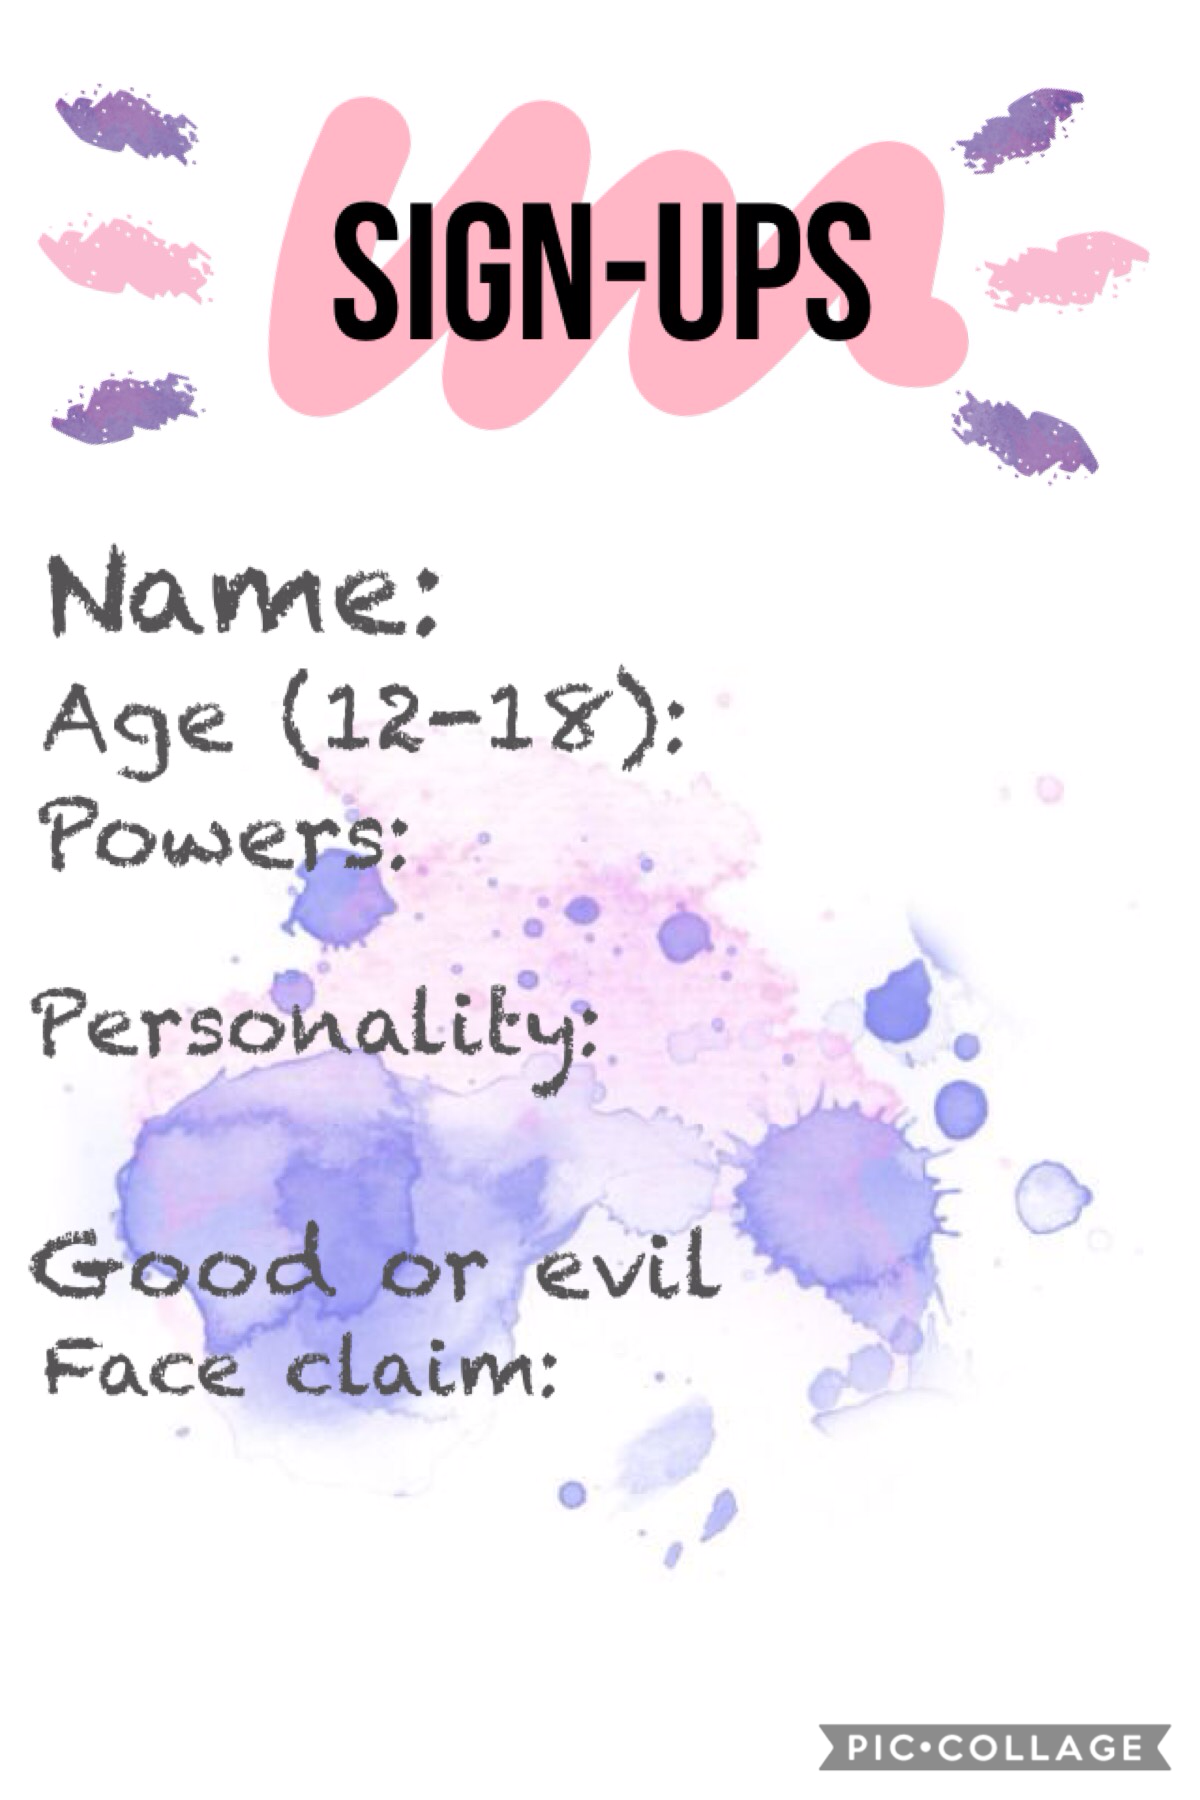 TAP-
Comment a backstory on ur sign up if u want. Not a big deal tho. :))

 please sign up!!